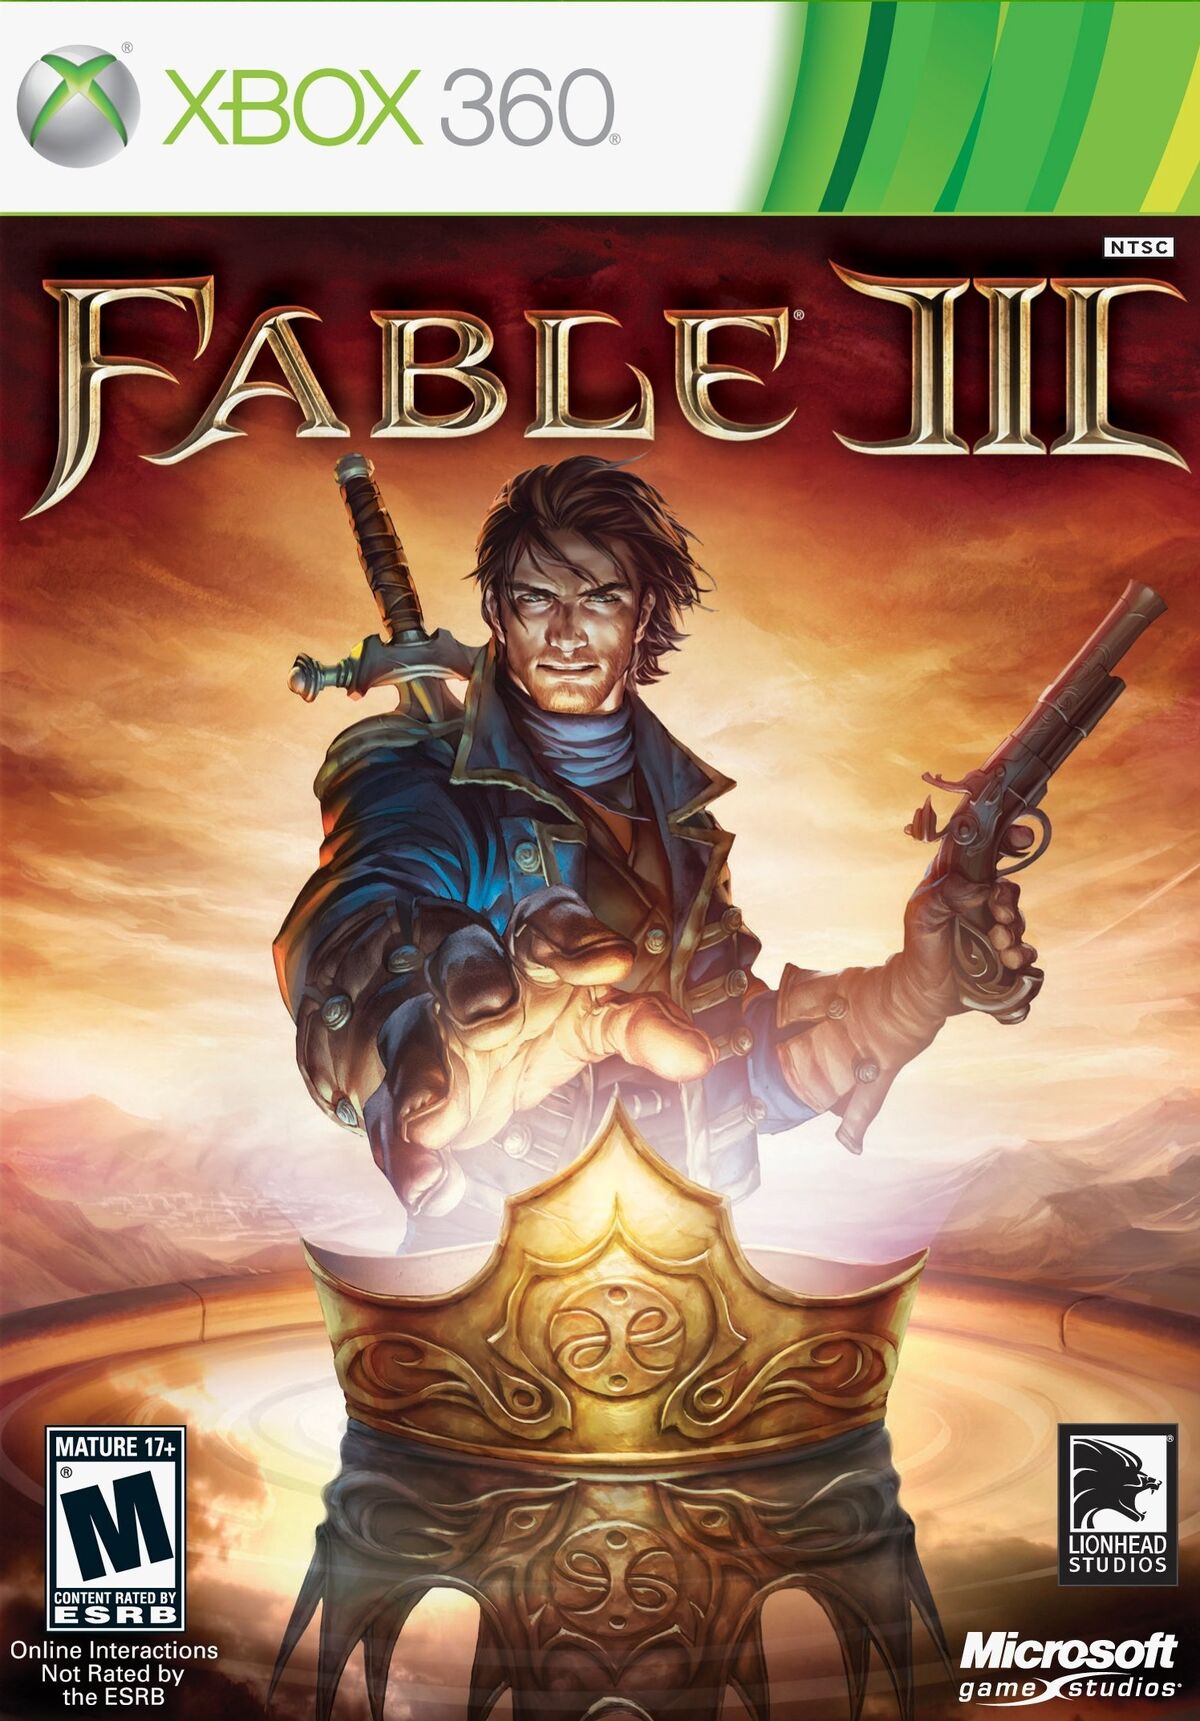 Fable II Game of the Year Edition, The Fable Wiki